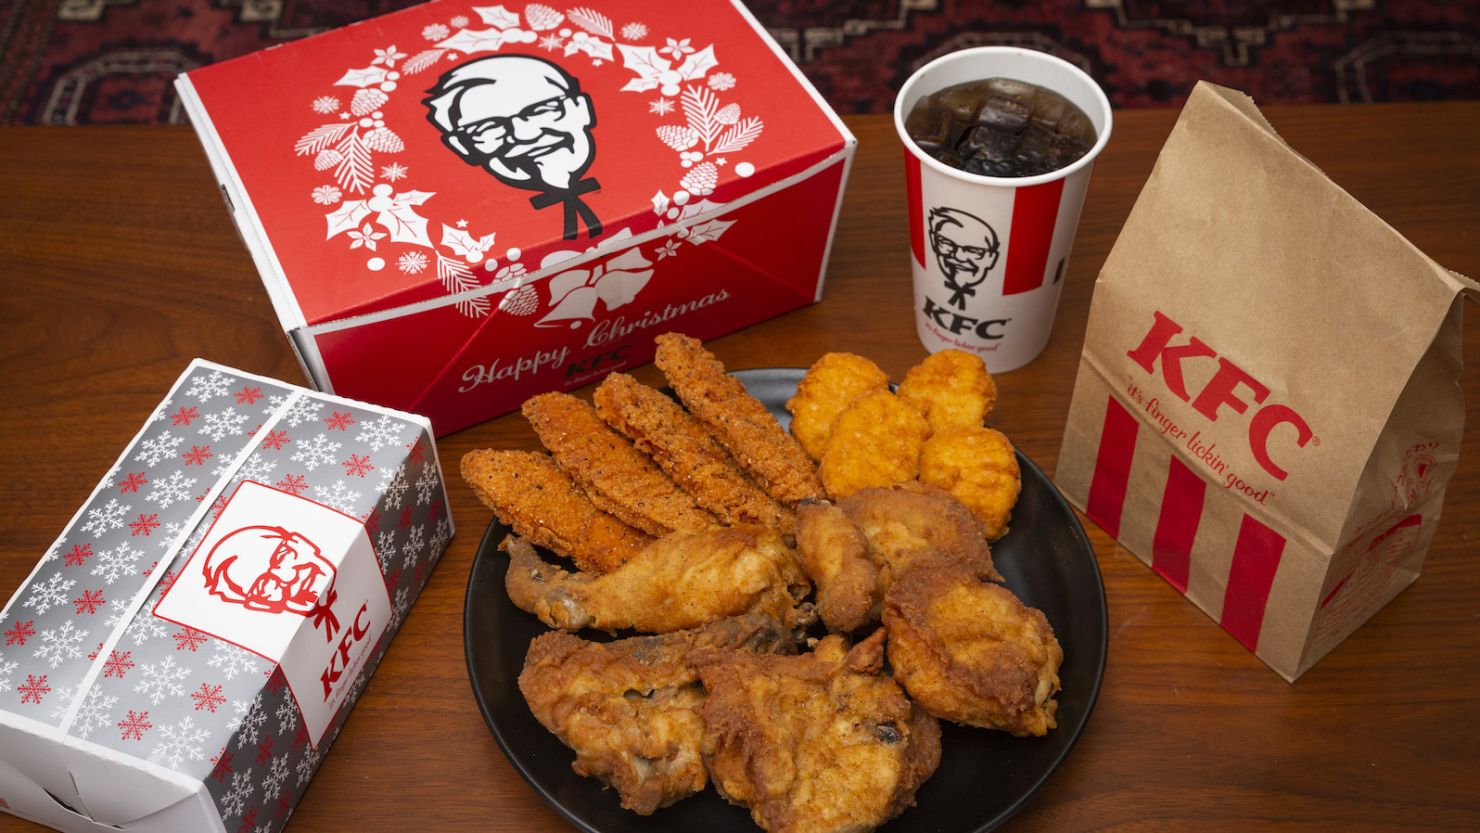 KFC Christmas meal boxes are pictured on December 23, 2020 in Tokyo, Japan. KFC at Christmas has become something of a tradition in Japan. 